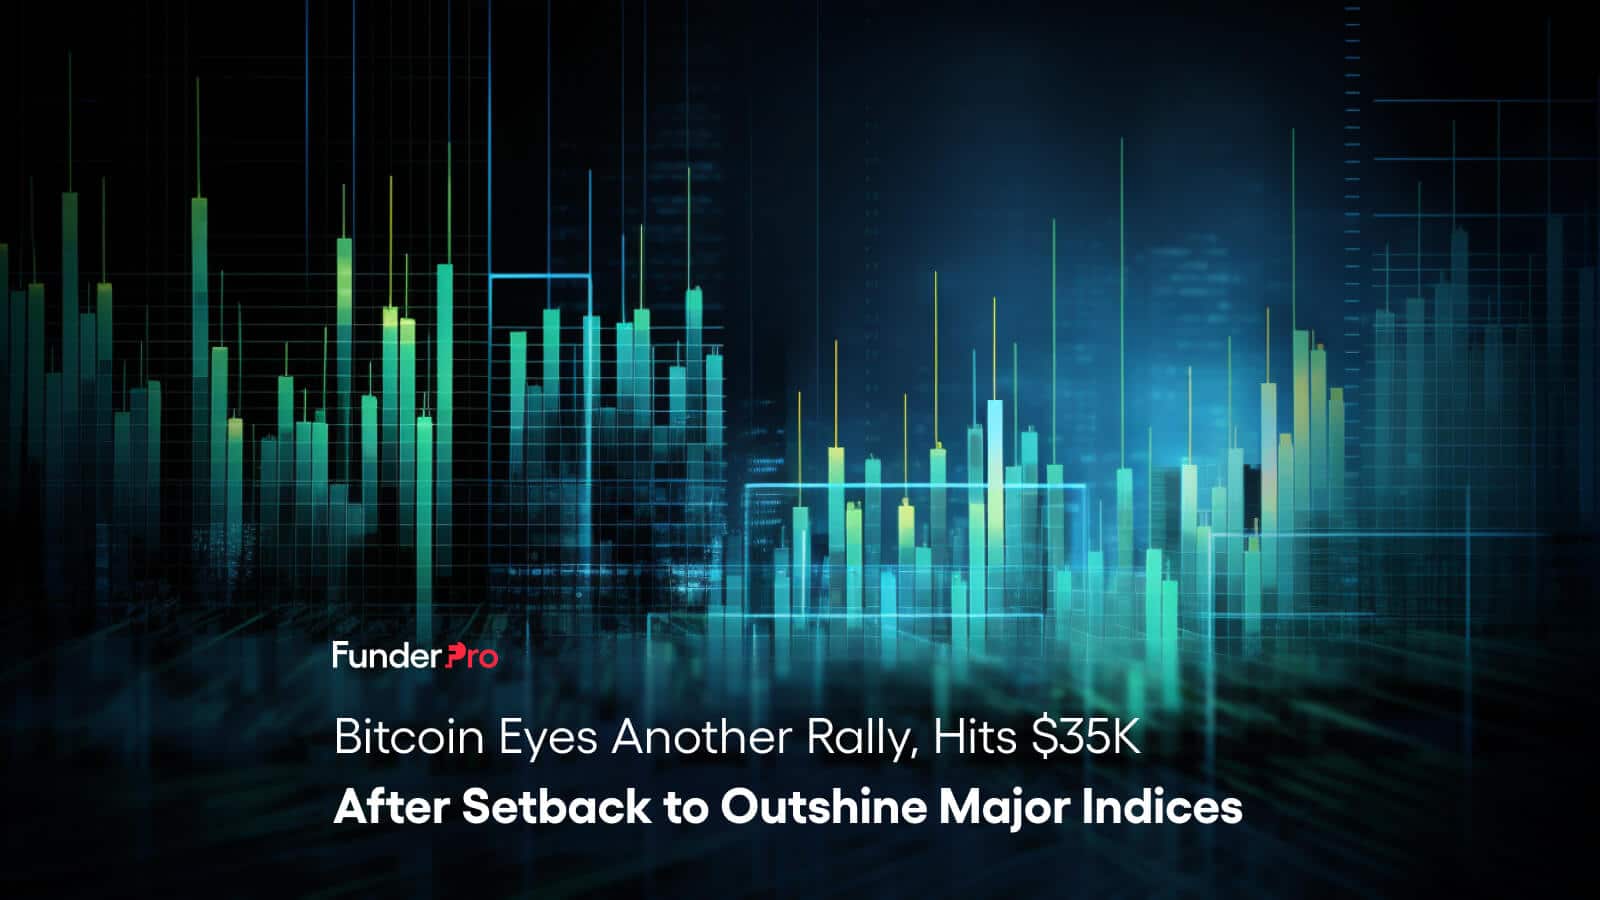 Bitcoin Eyes Another Rally, Hits $35K After Setback to Outshine Major Indices